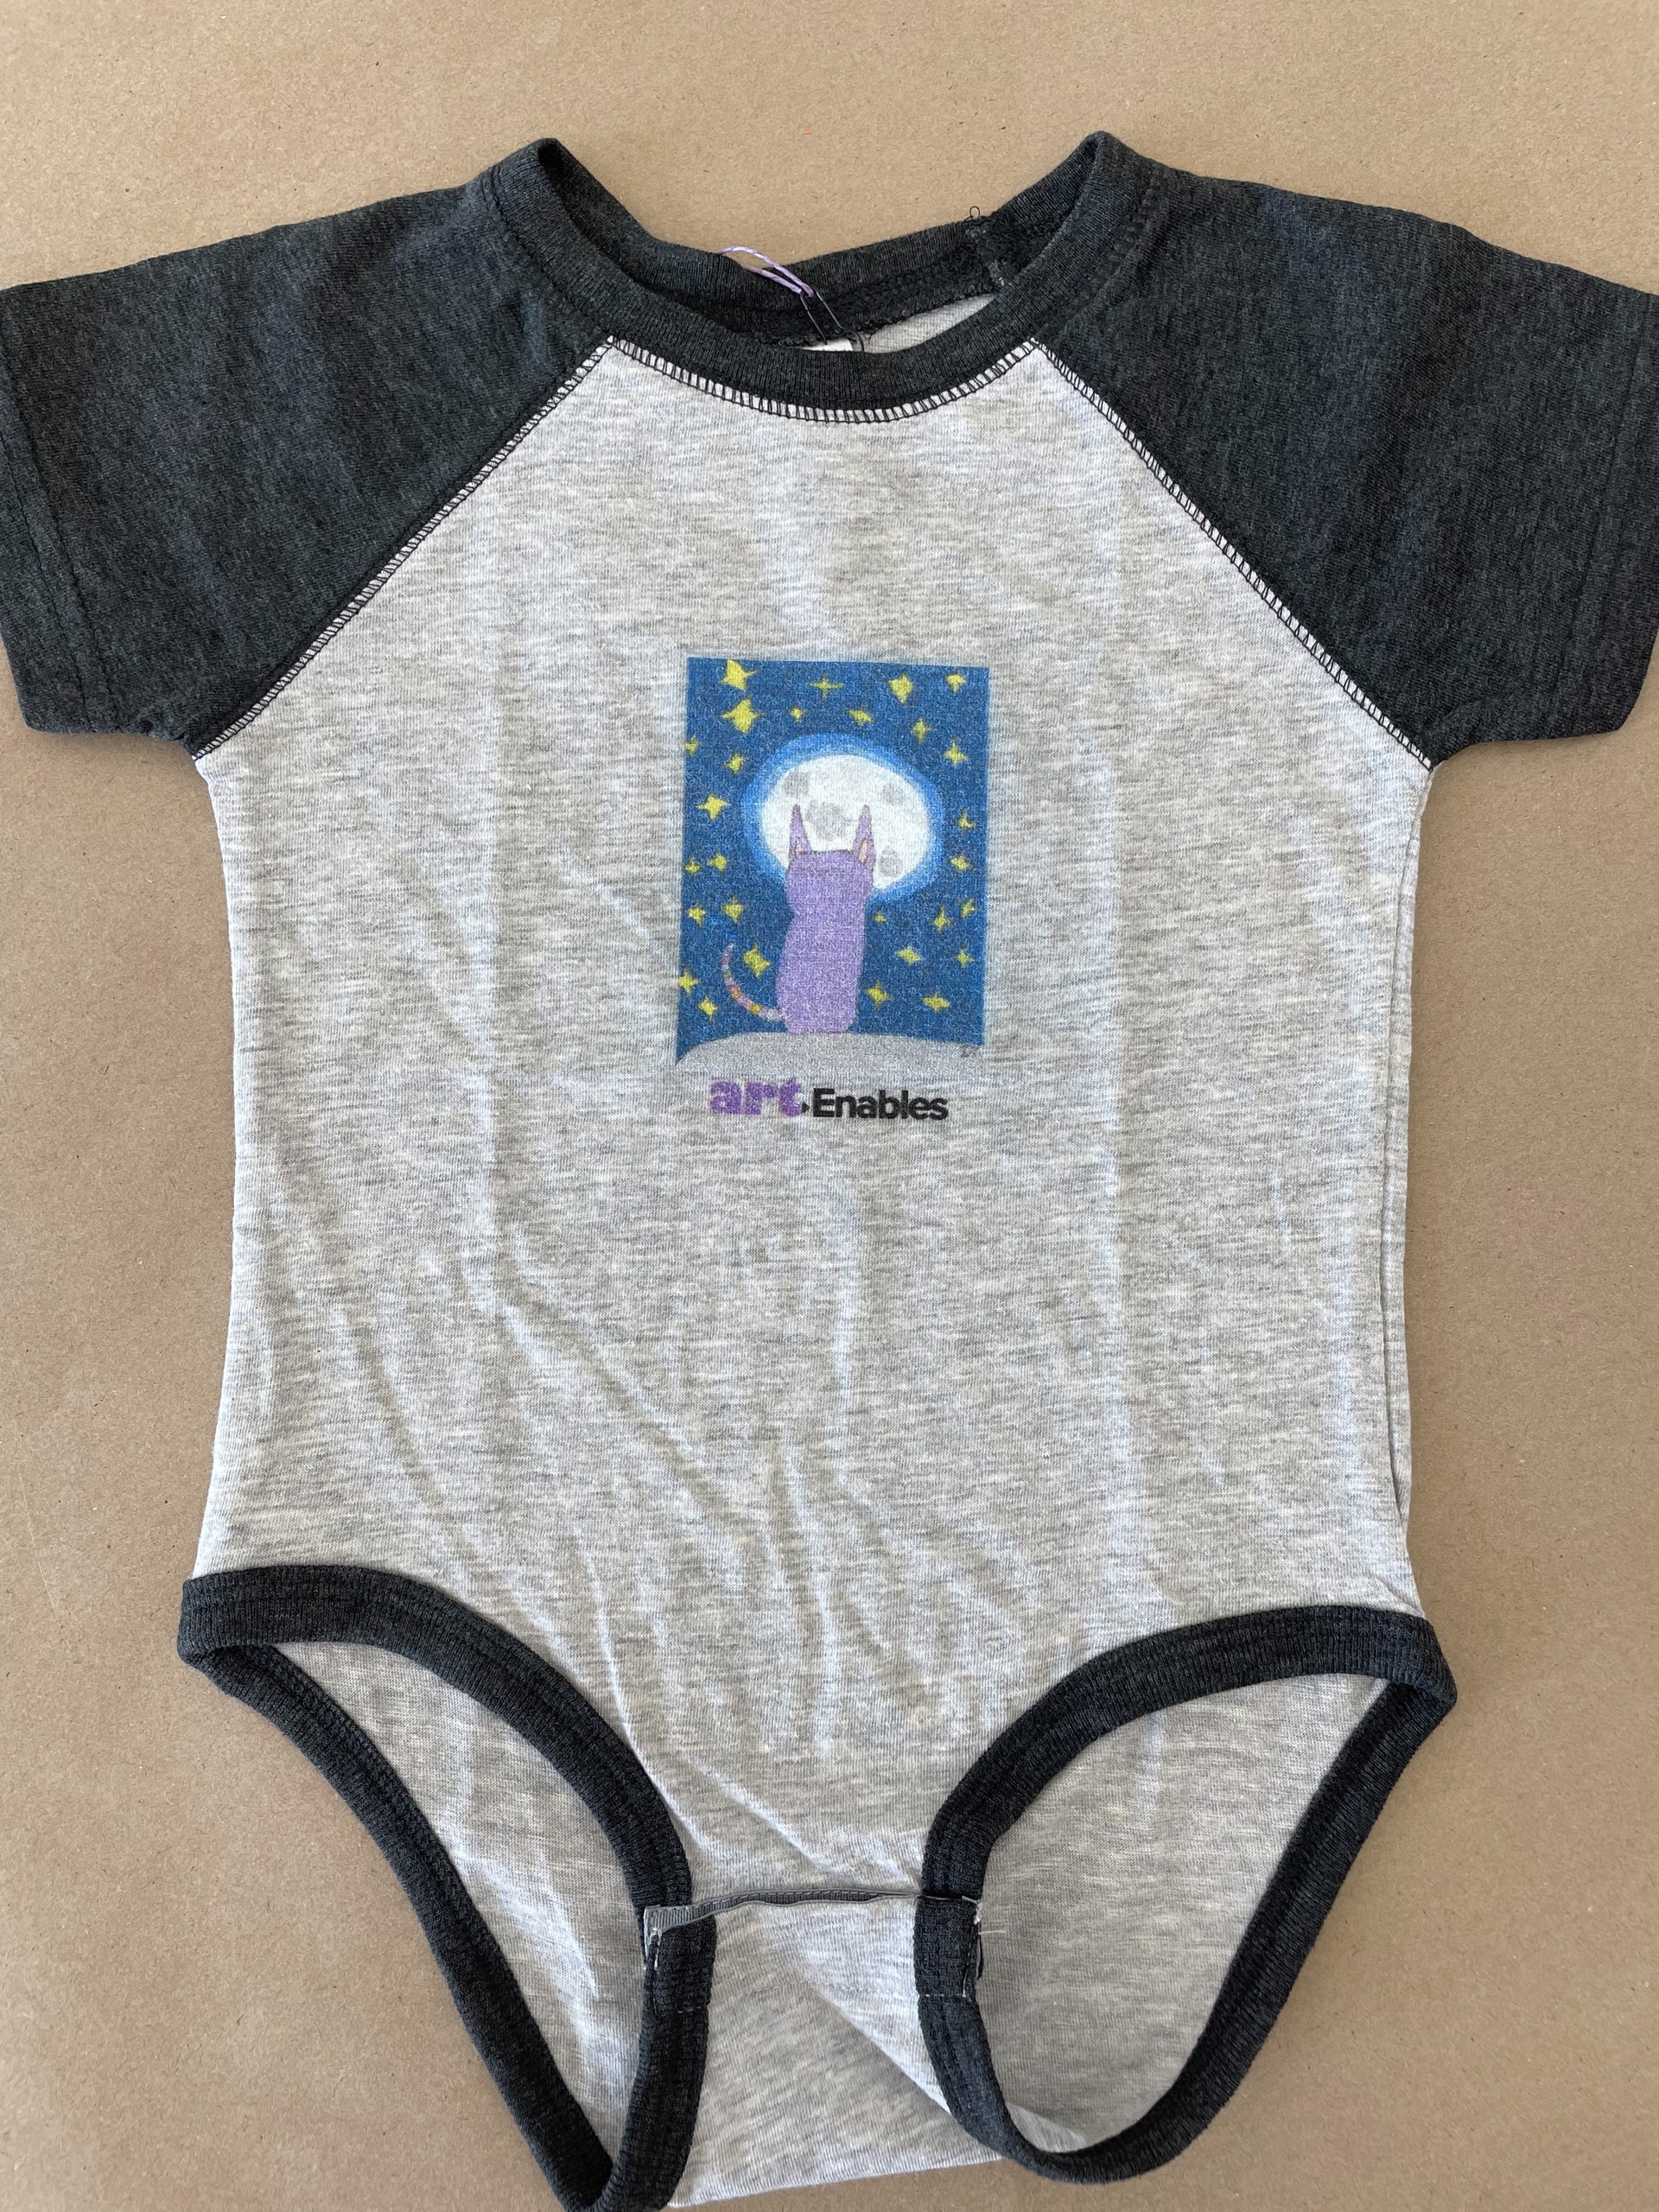 Baby Onesie (baseball style, artwork by Imani Turner) 12 mo - charcoal heather gray by Art Enables Merchandise